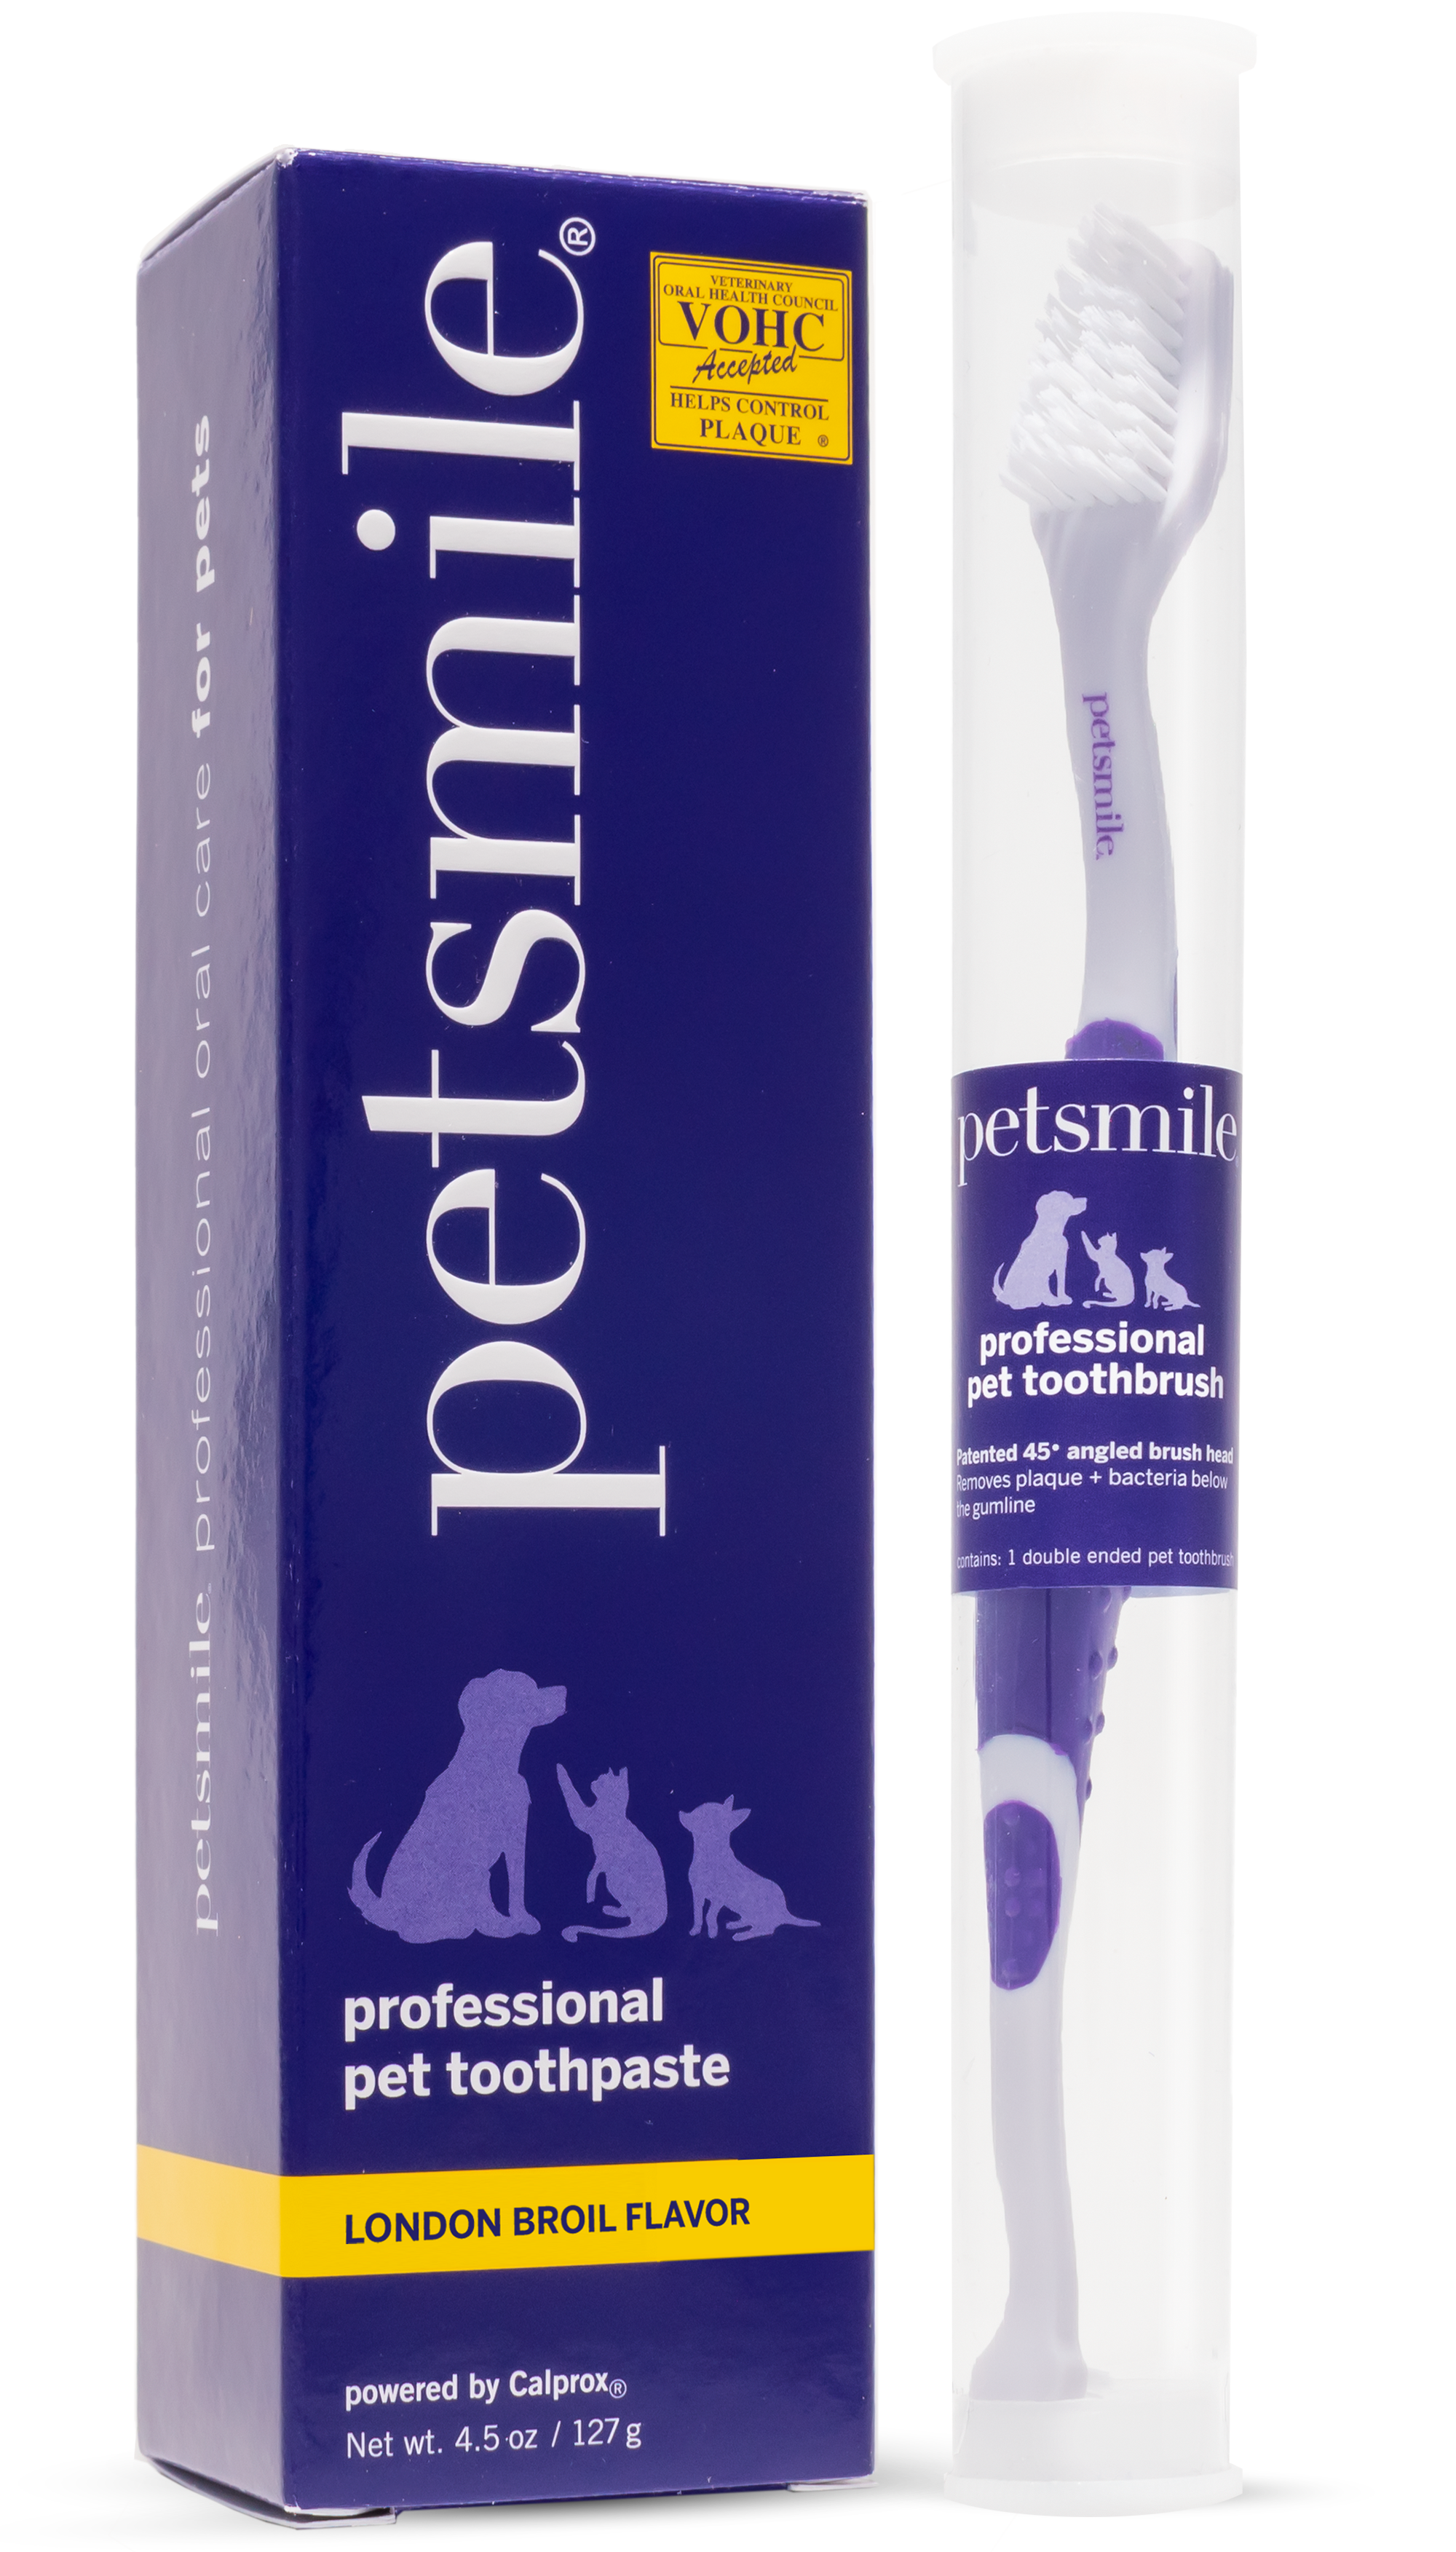 Proven dental care for cats , Professional-grade brush and toothpaste combo , Large cat toothbrush and toothpaste in London Broil Flavor , VOHC-approved cat toothpaste in purple bottle  , petsmile dental care for professional results